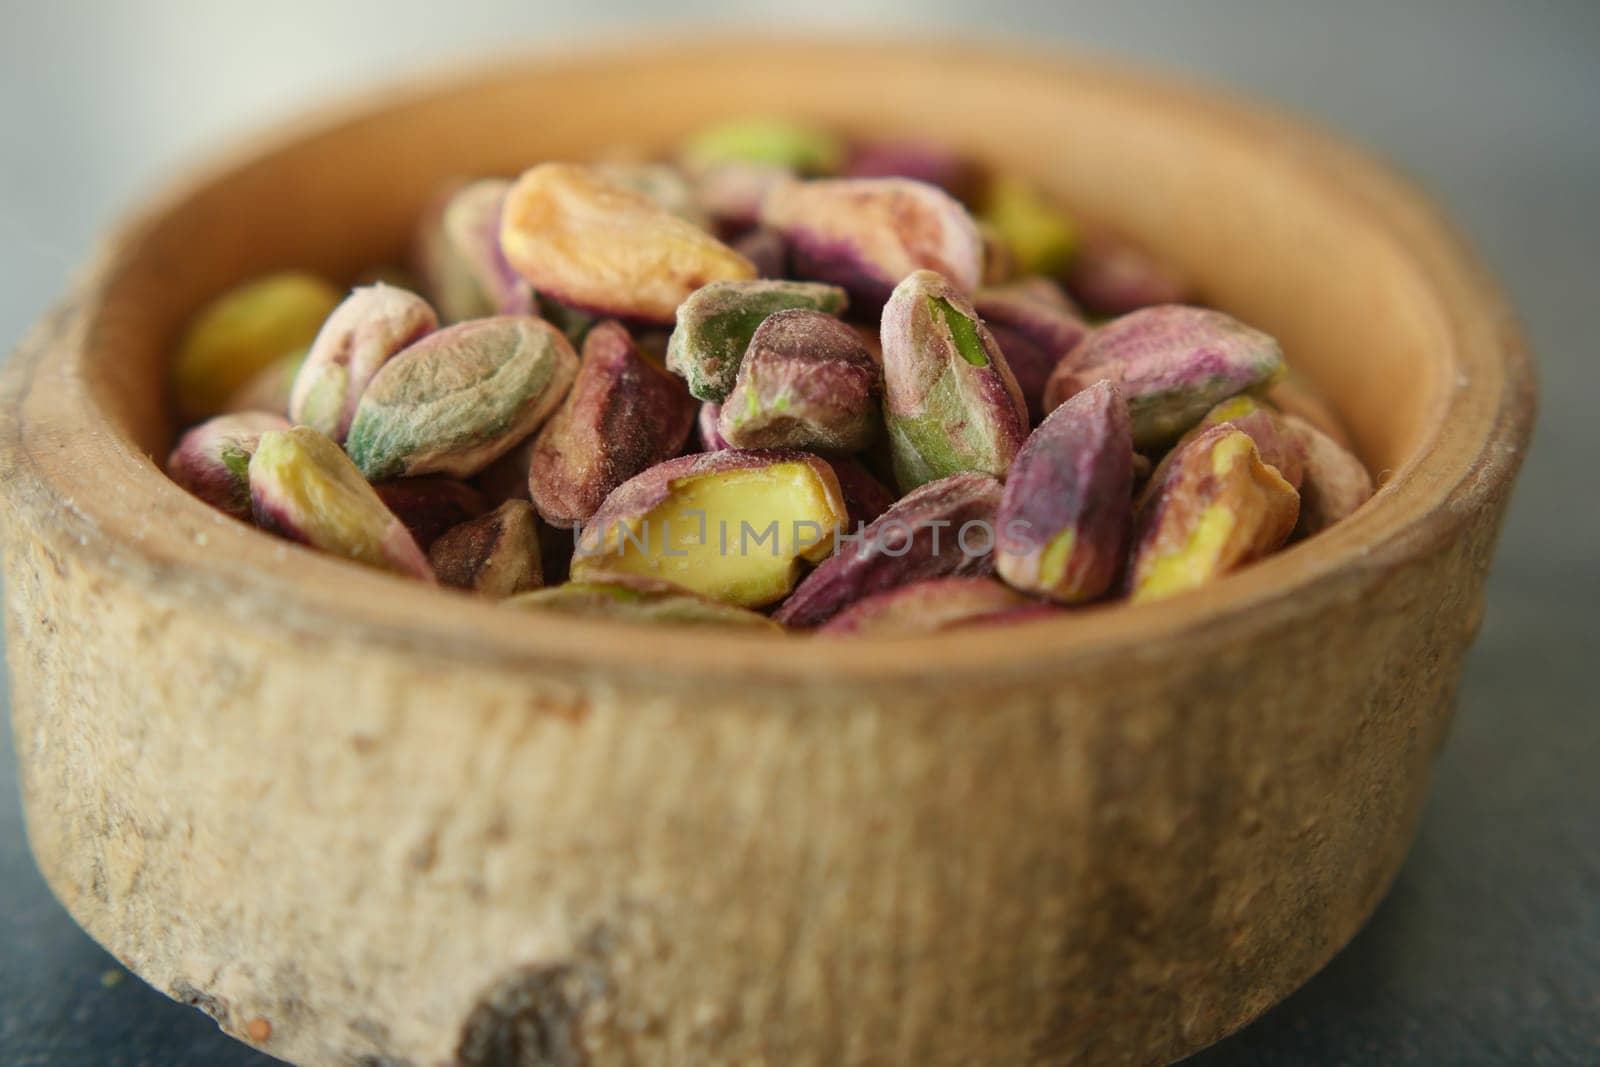 Wooden bowl filled with pistachios, a natural and nutritious superfood.